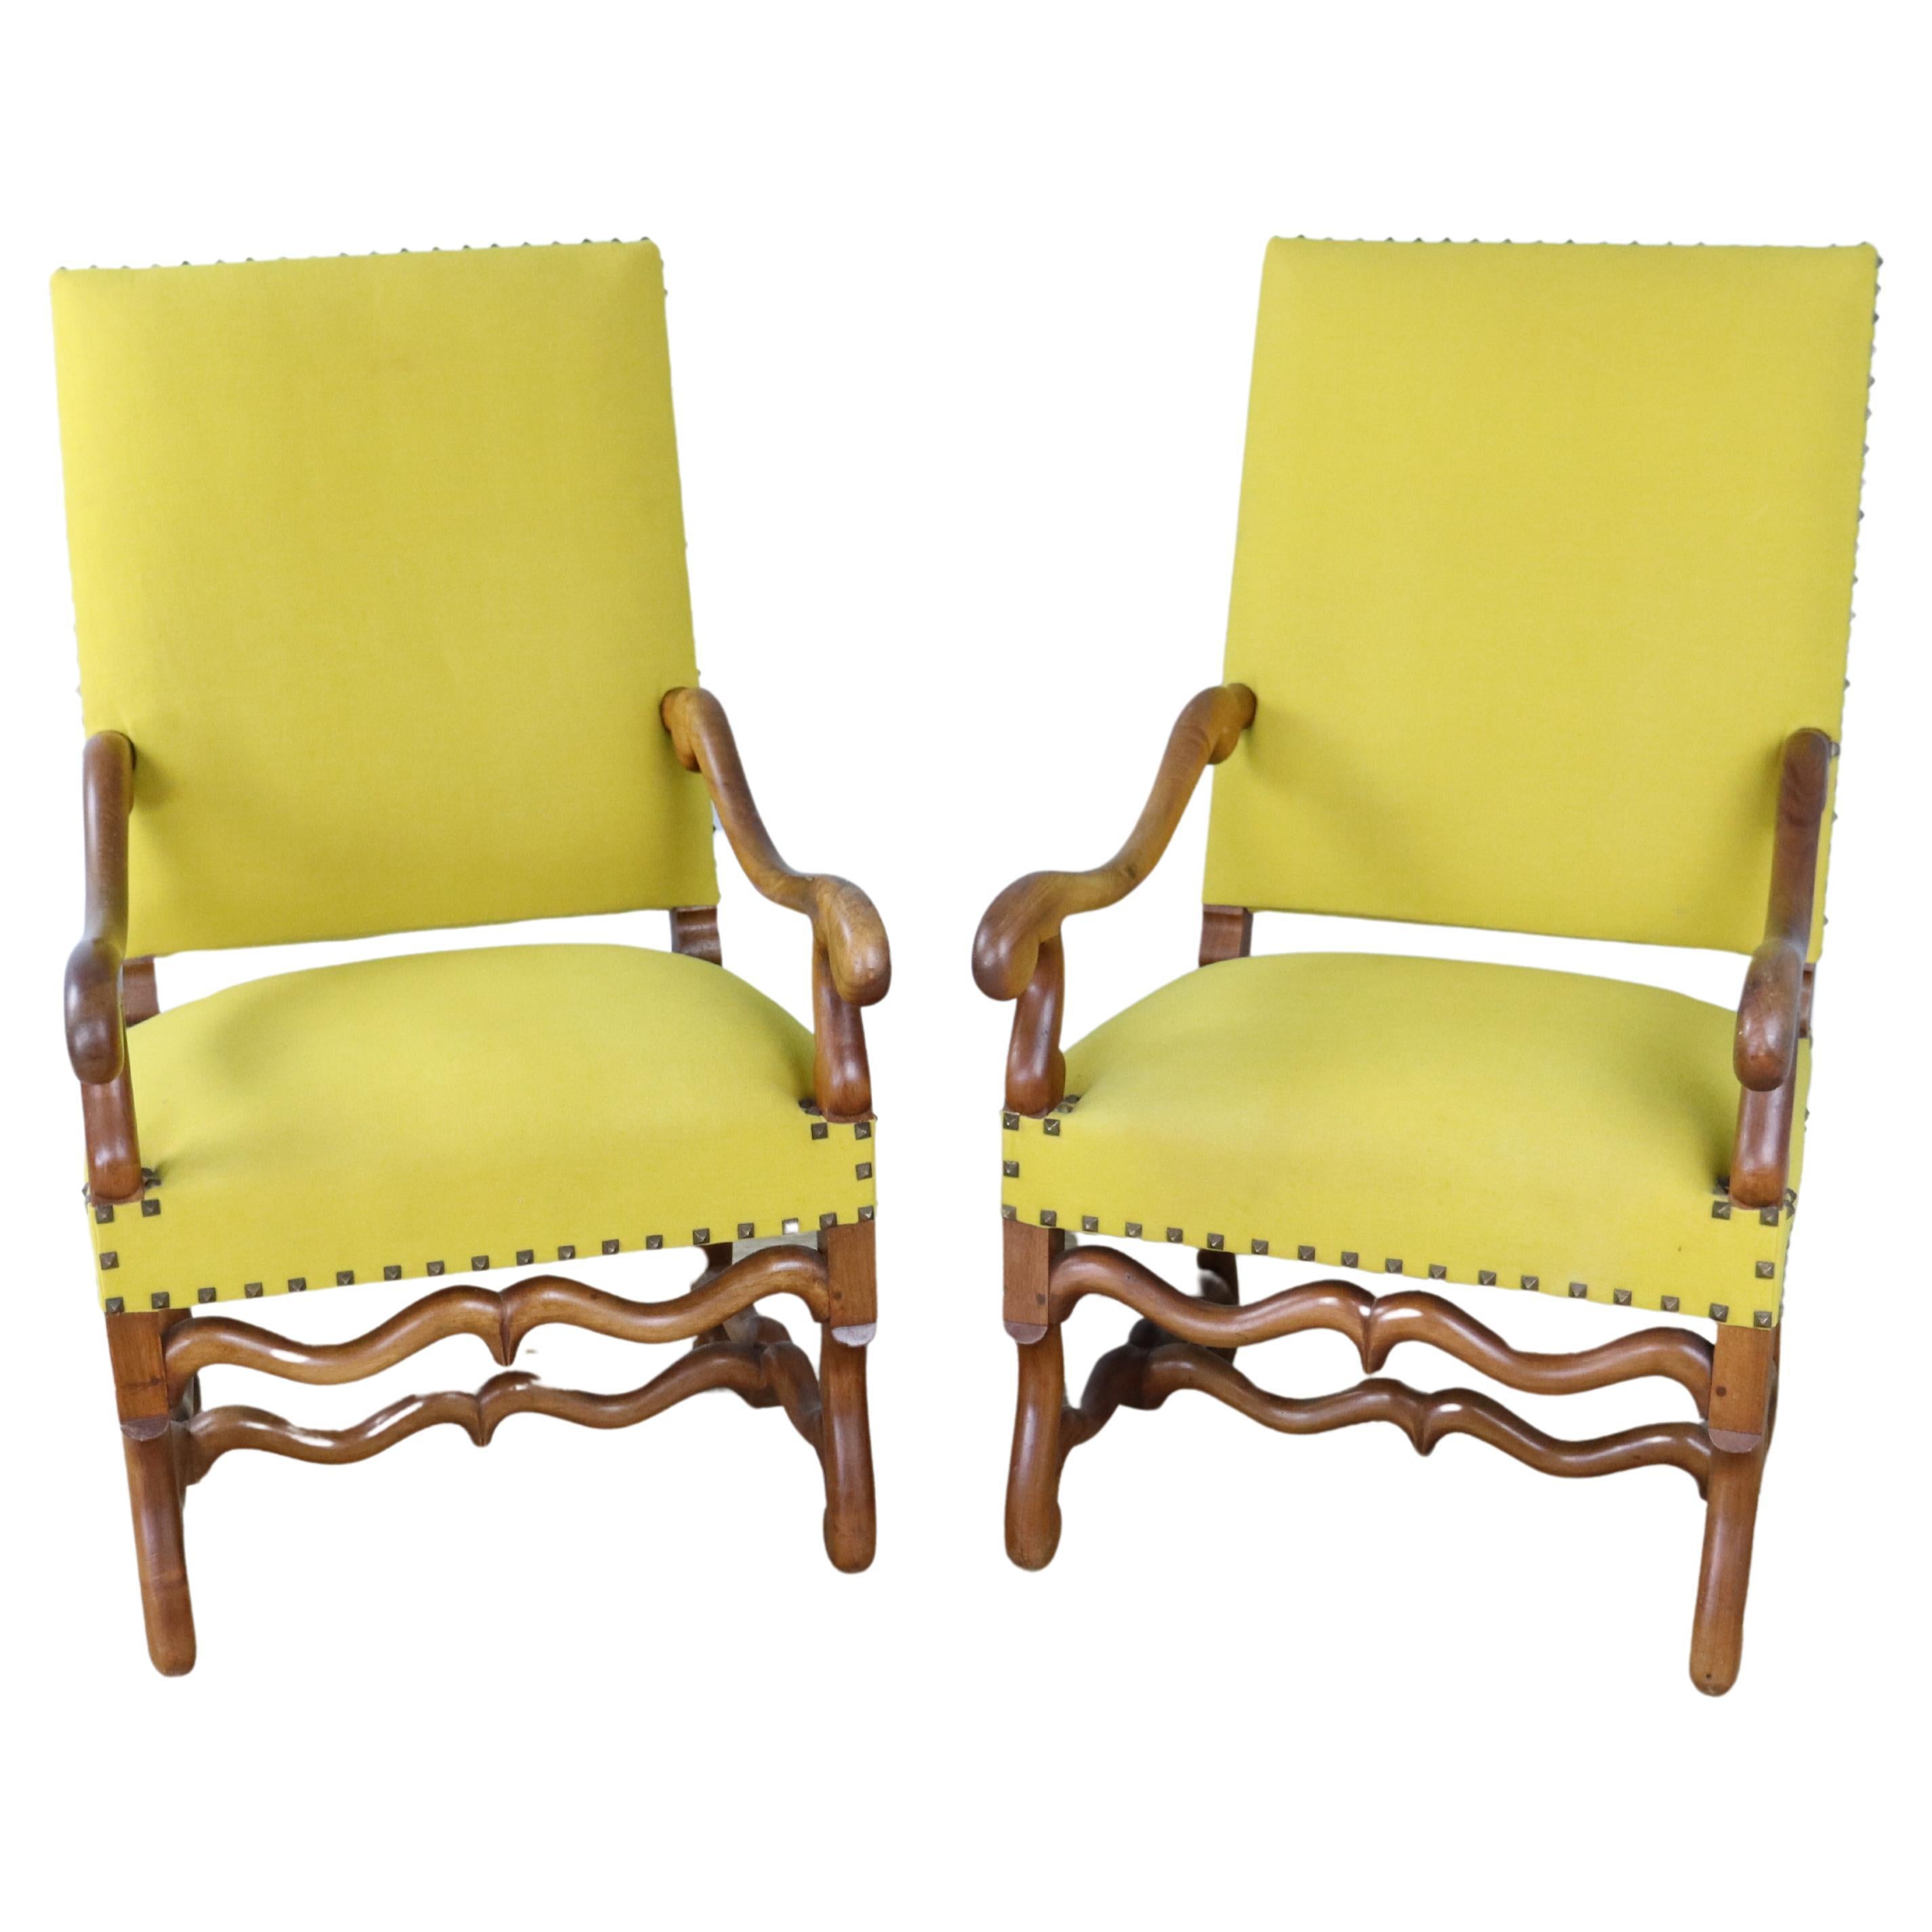 Pair of French Walnut Armchairs, New Yellow Upholstery